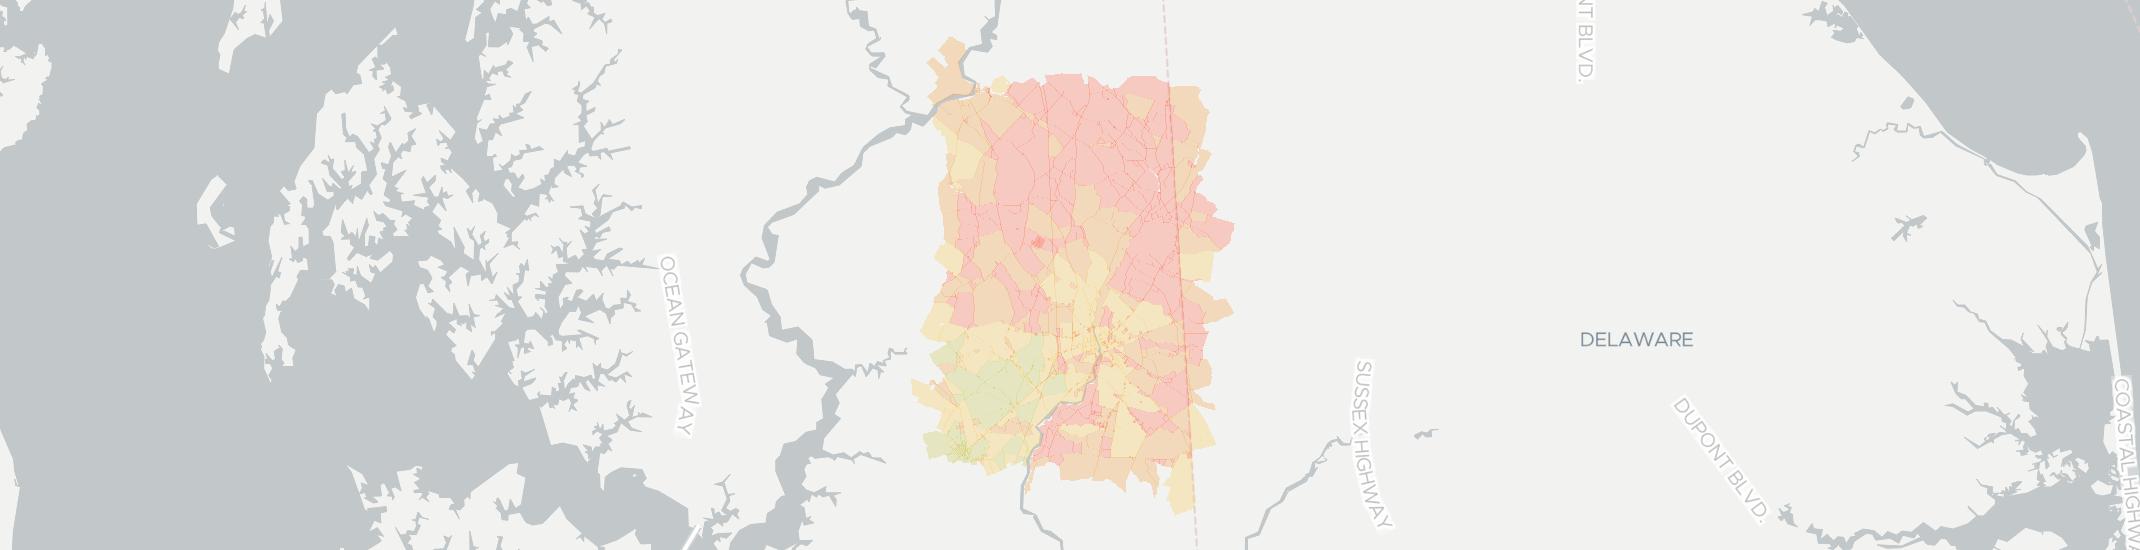 Federalsburg Internet Competition Map. Click for interactive map